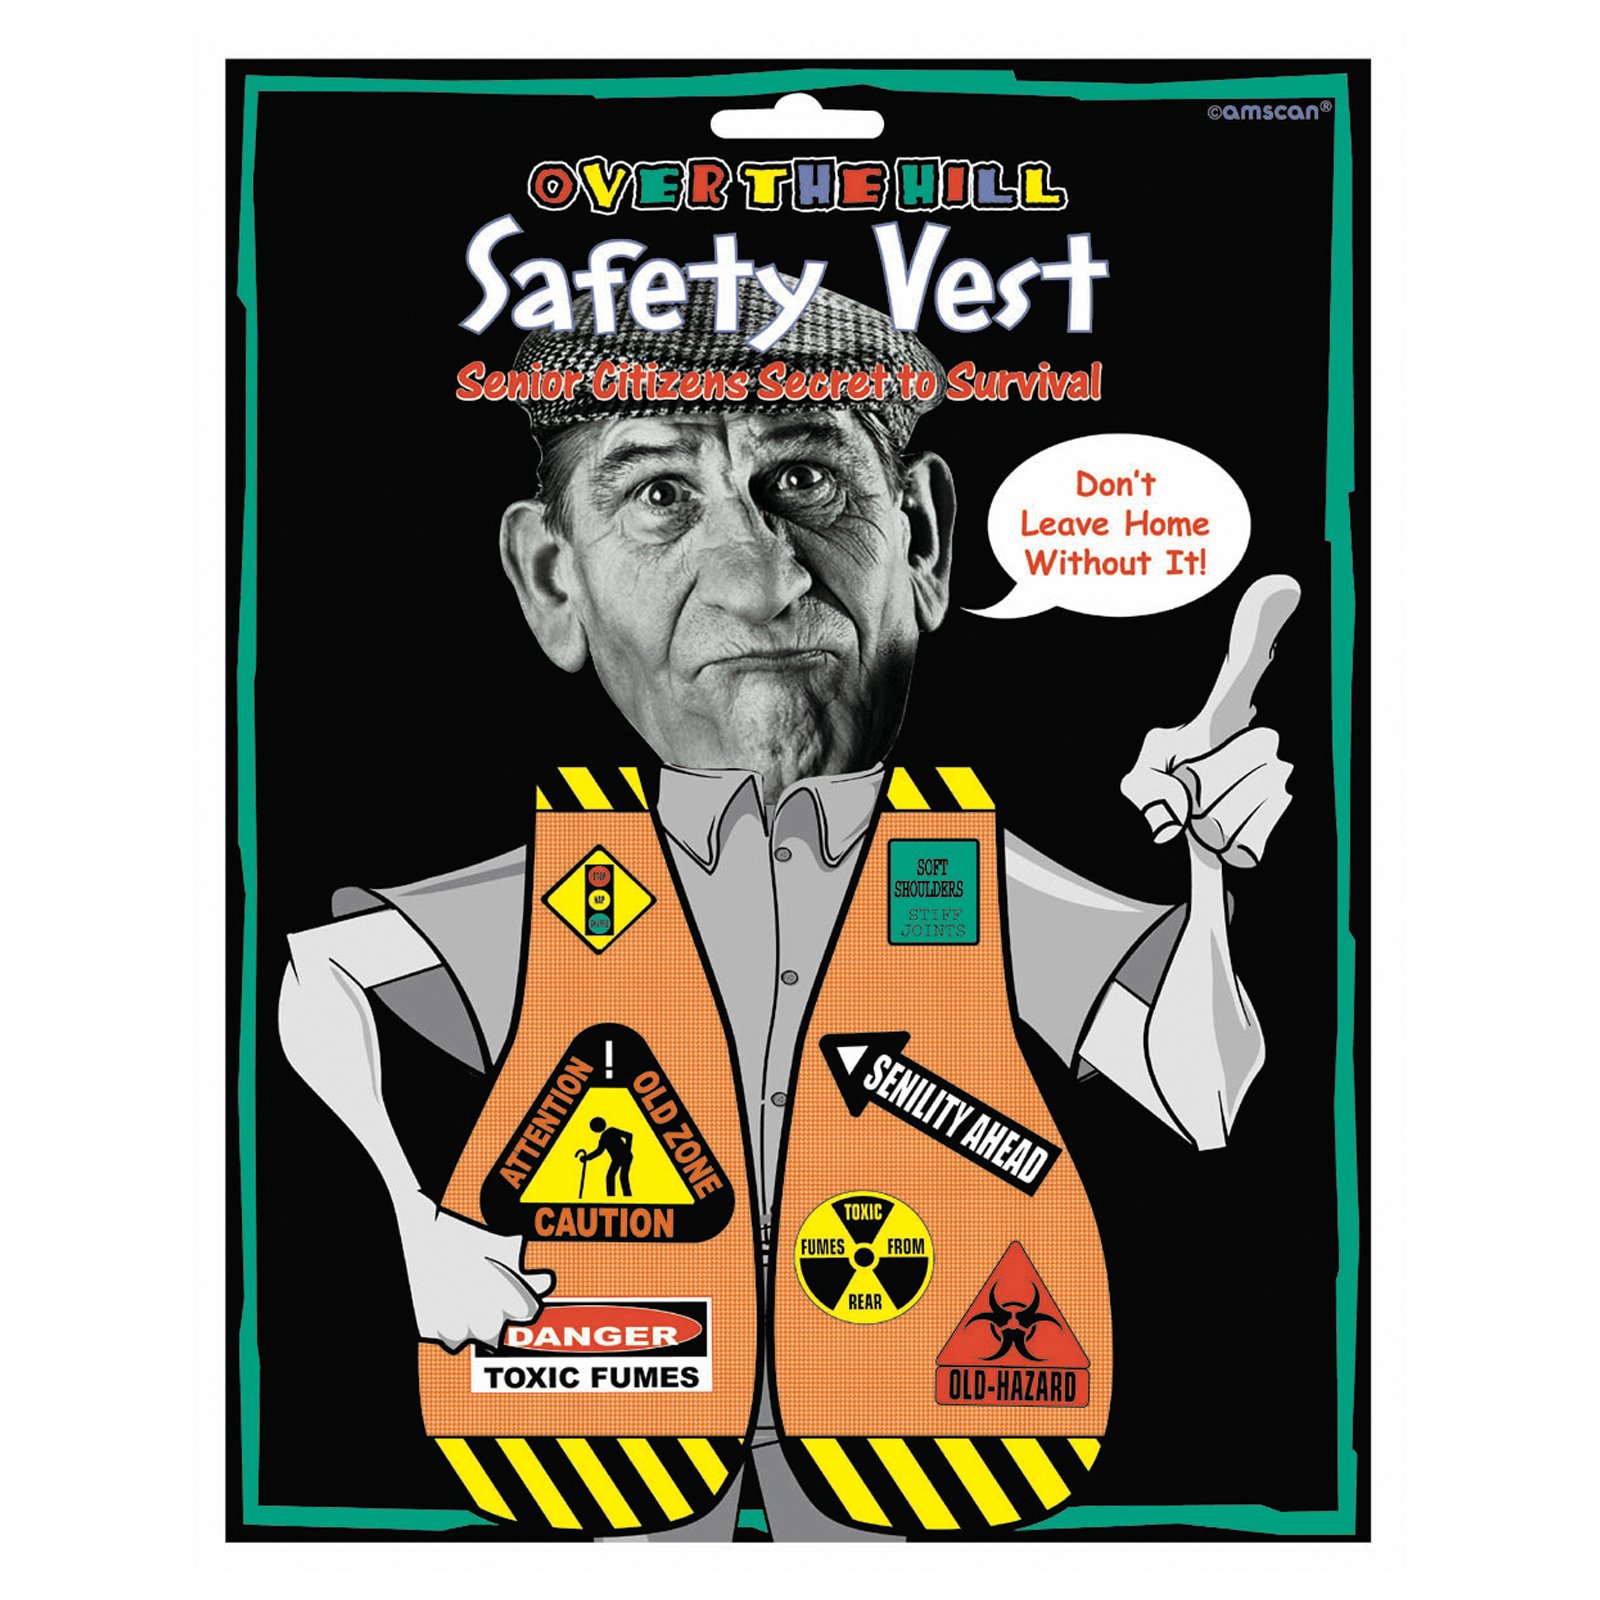 Over the Hill Safety Vest